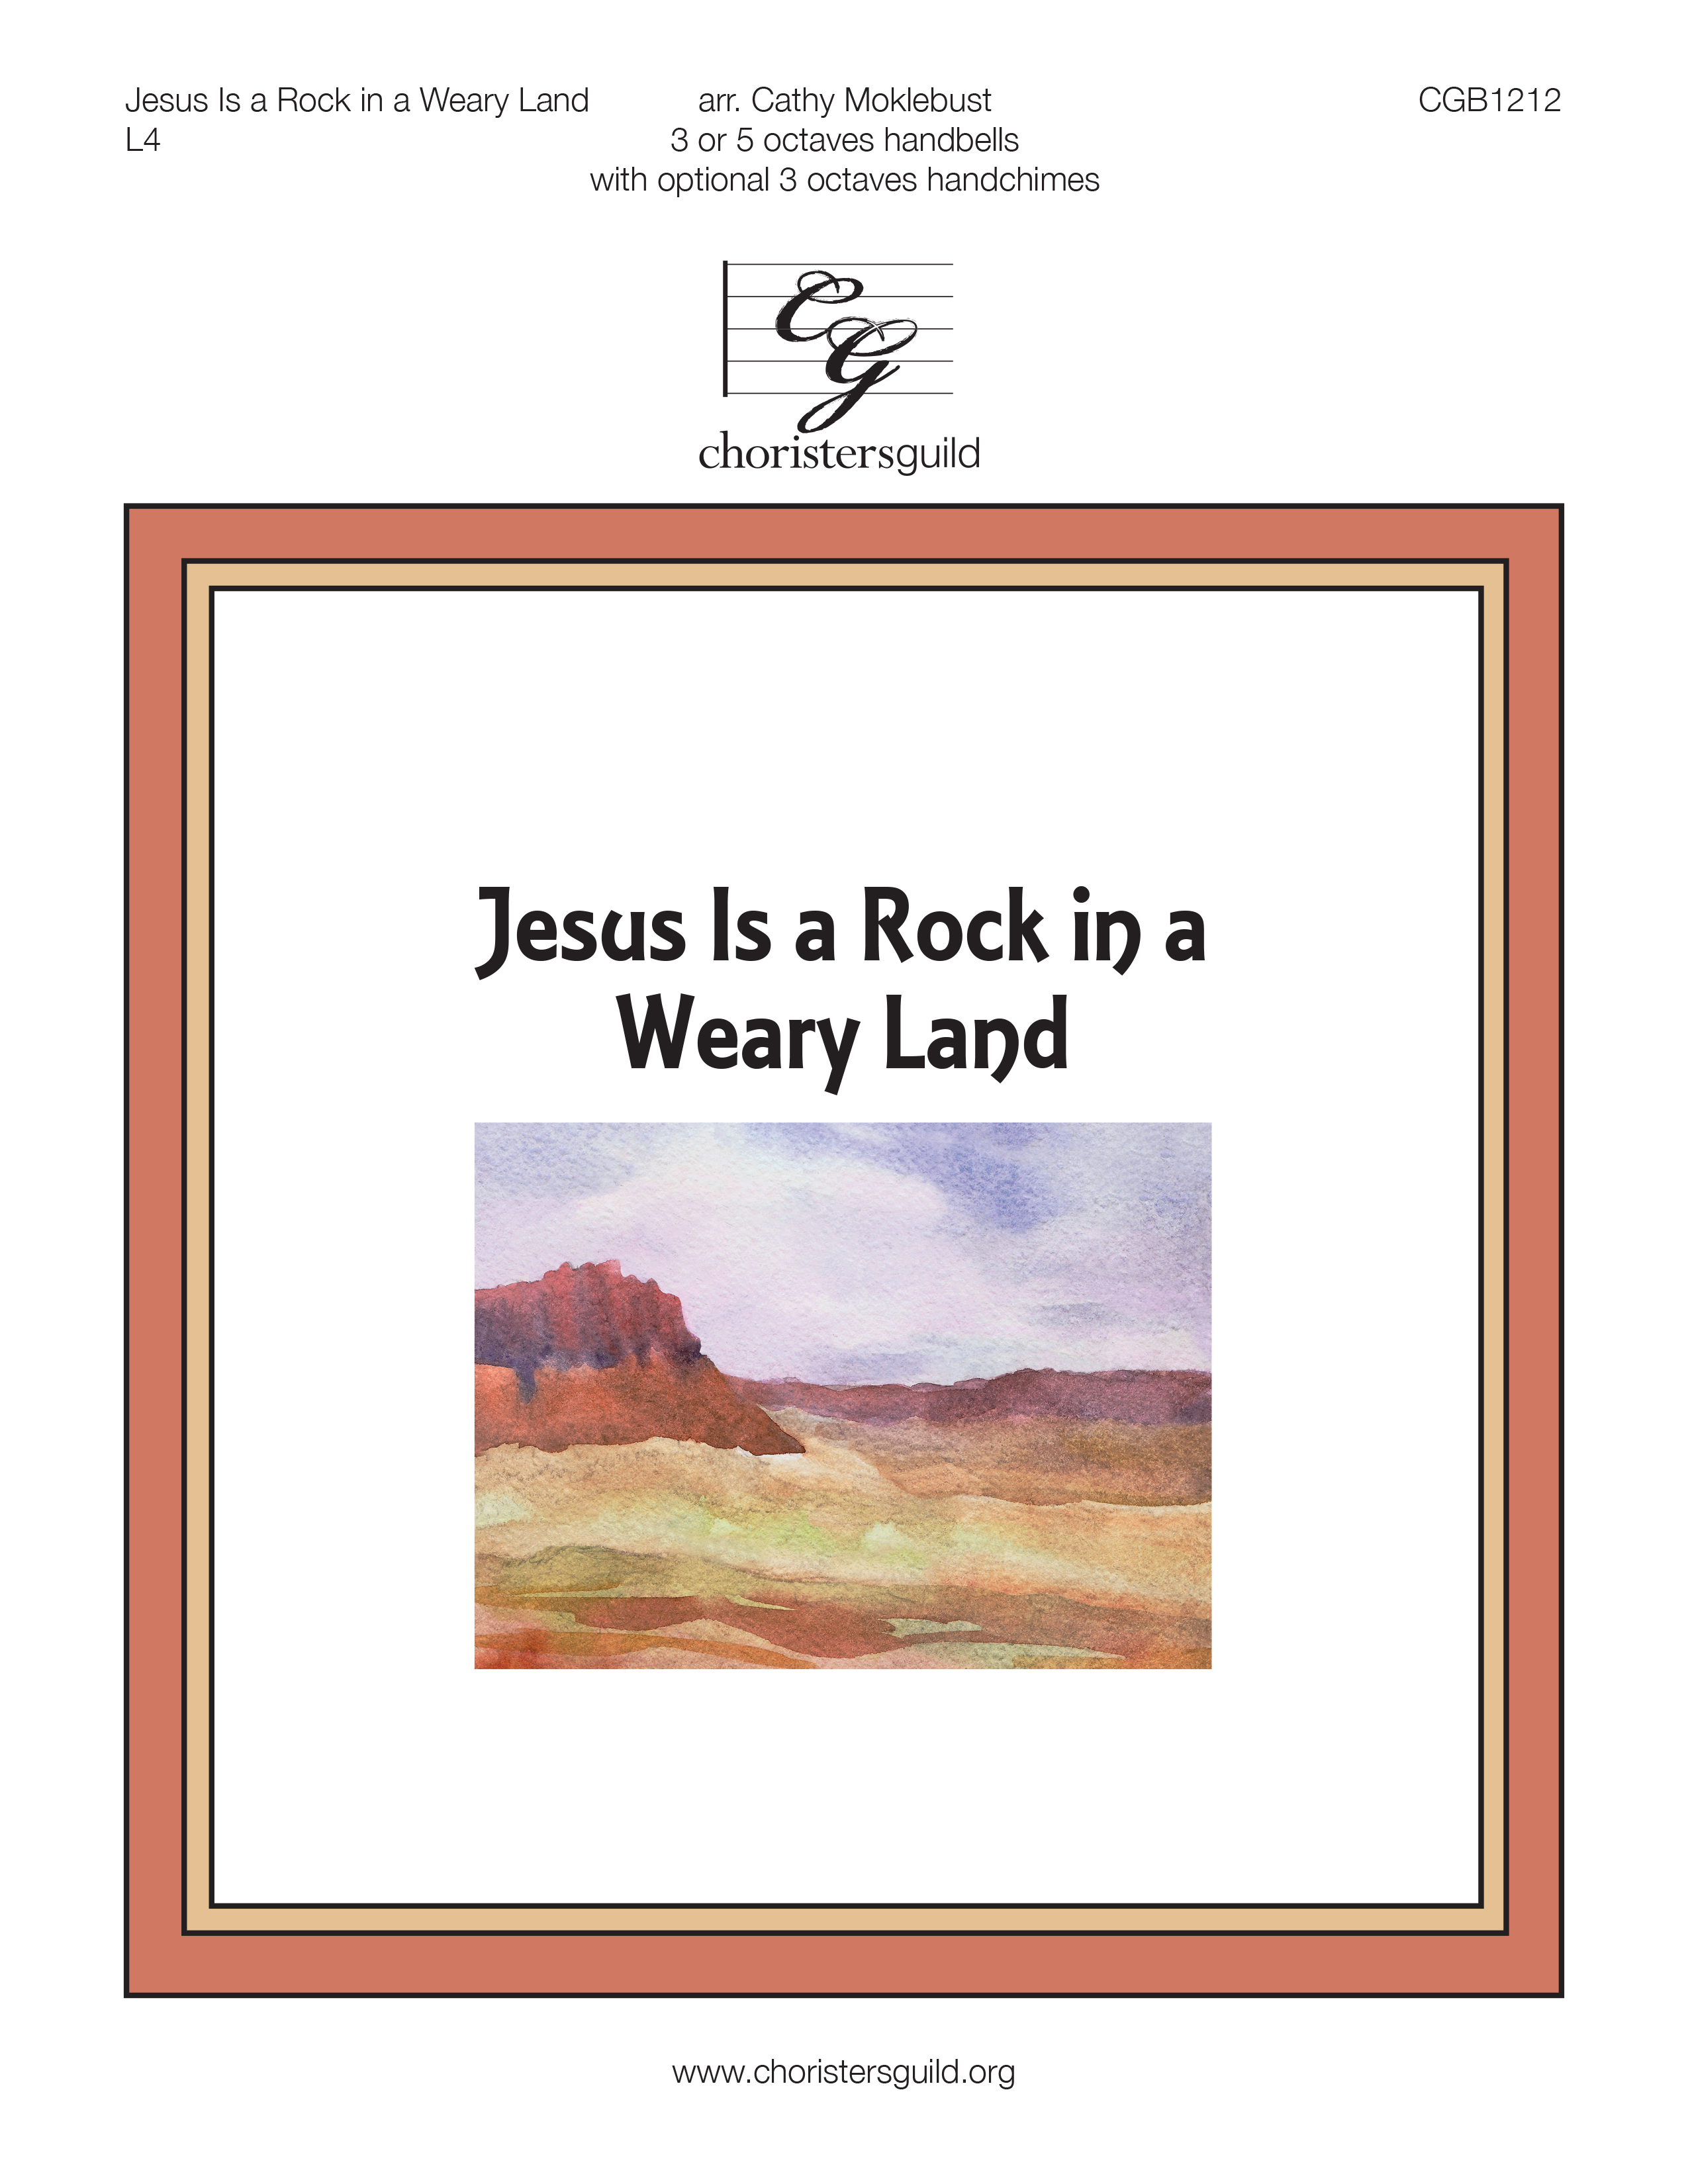 Jesus is a Rock in a Weary Land - 3 or 5 octaves